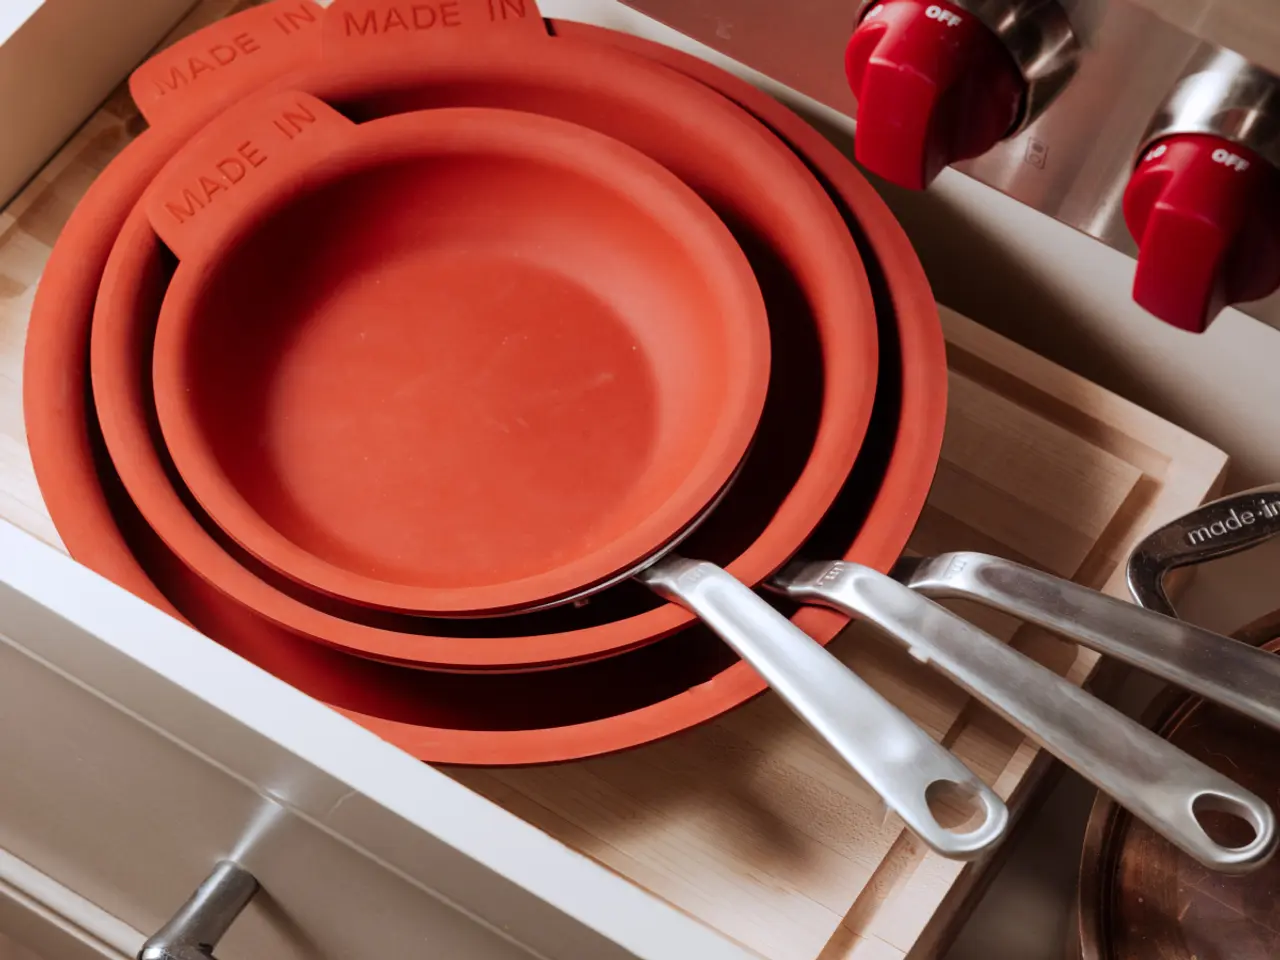 A set of nested orange frying pans with silver handles is neatly organized in a wooden drawer among other kitchen utensils.